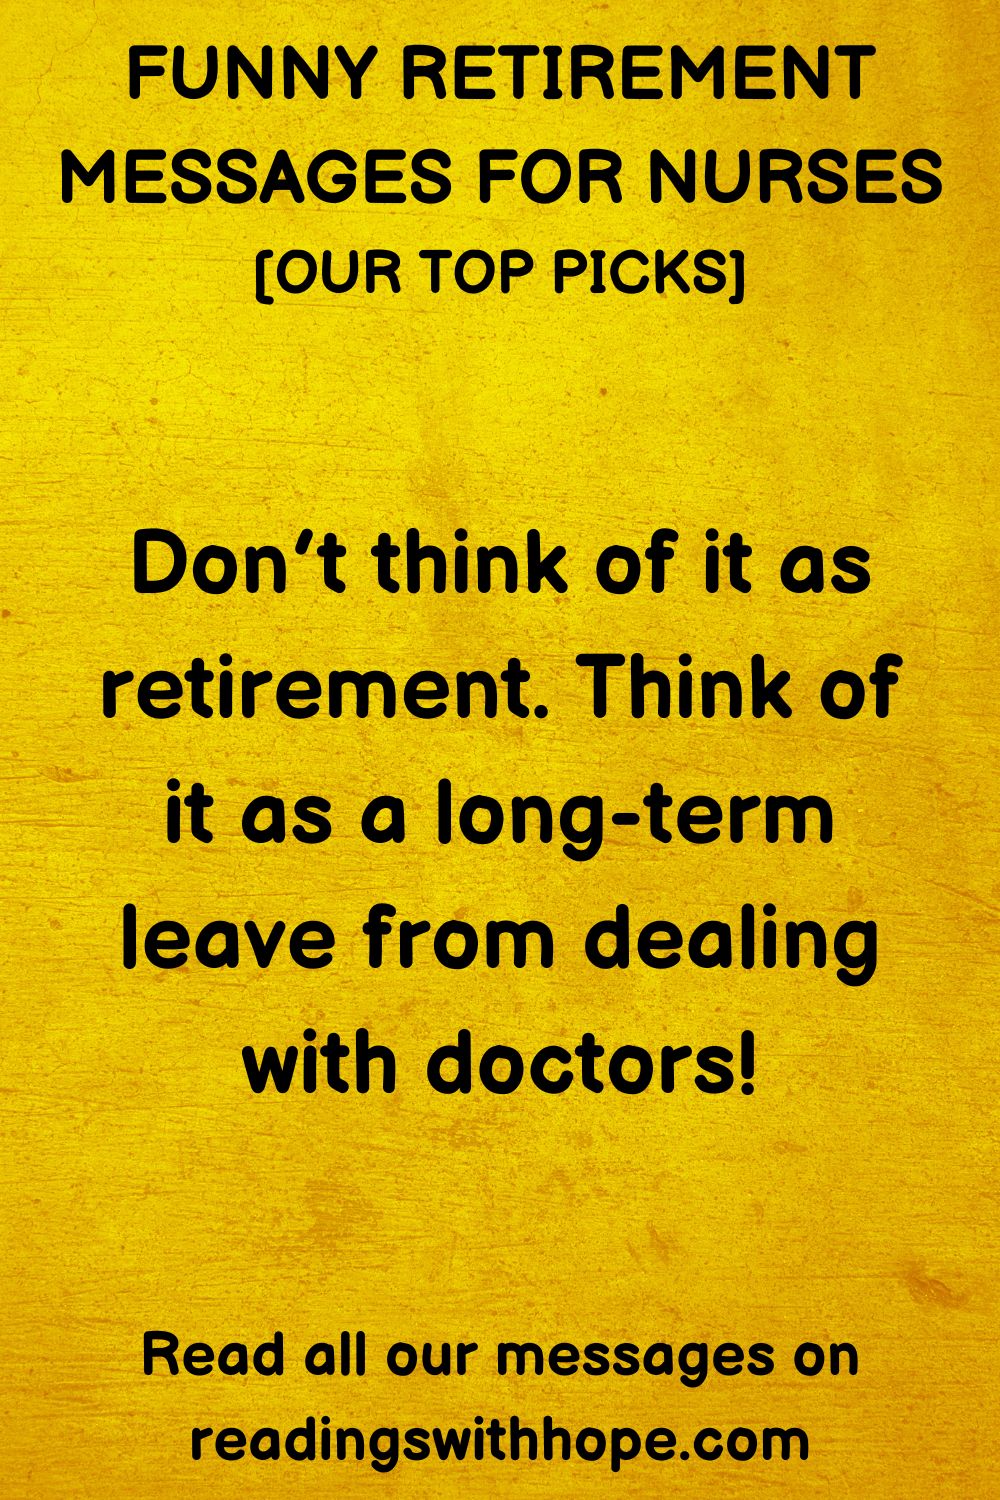 Funny Retirement Message For a Nurse
